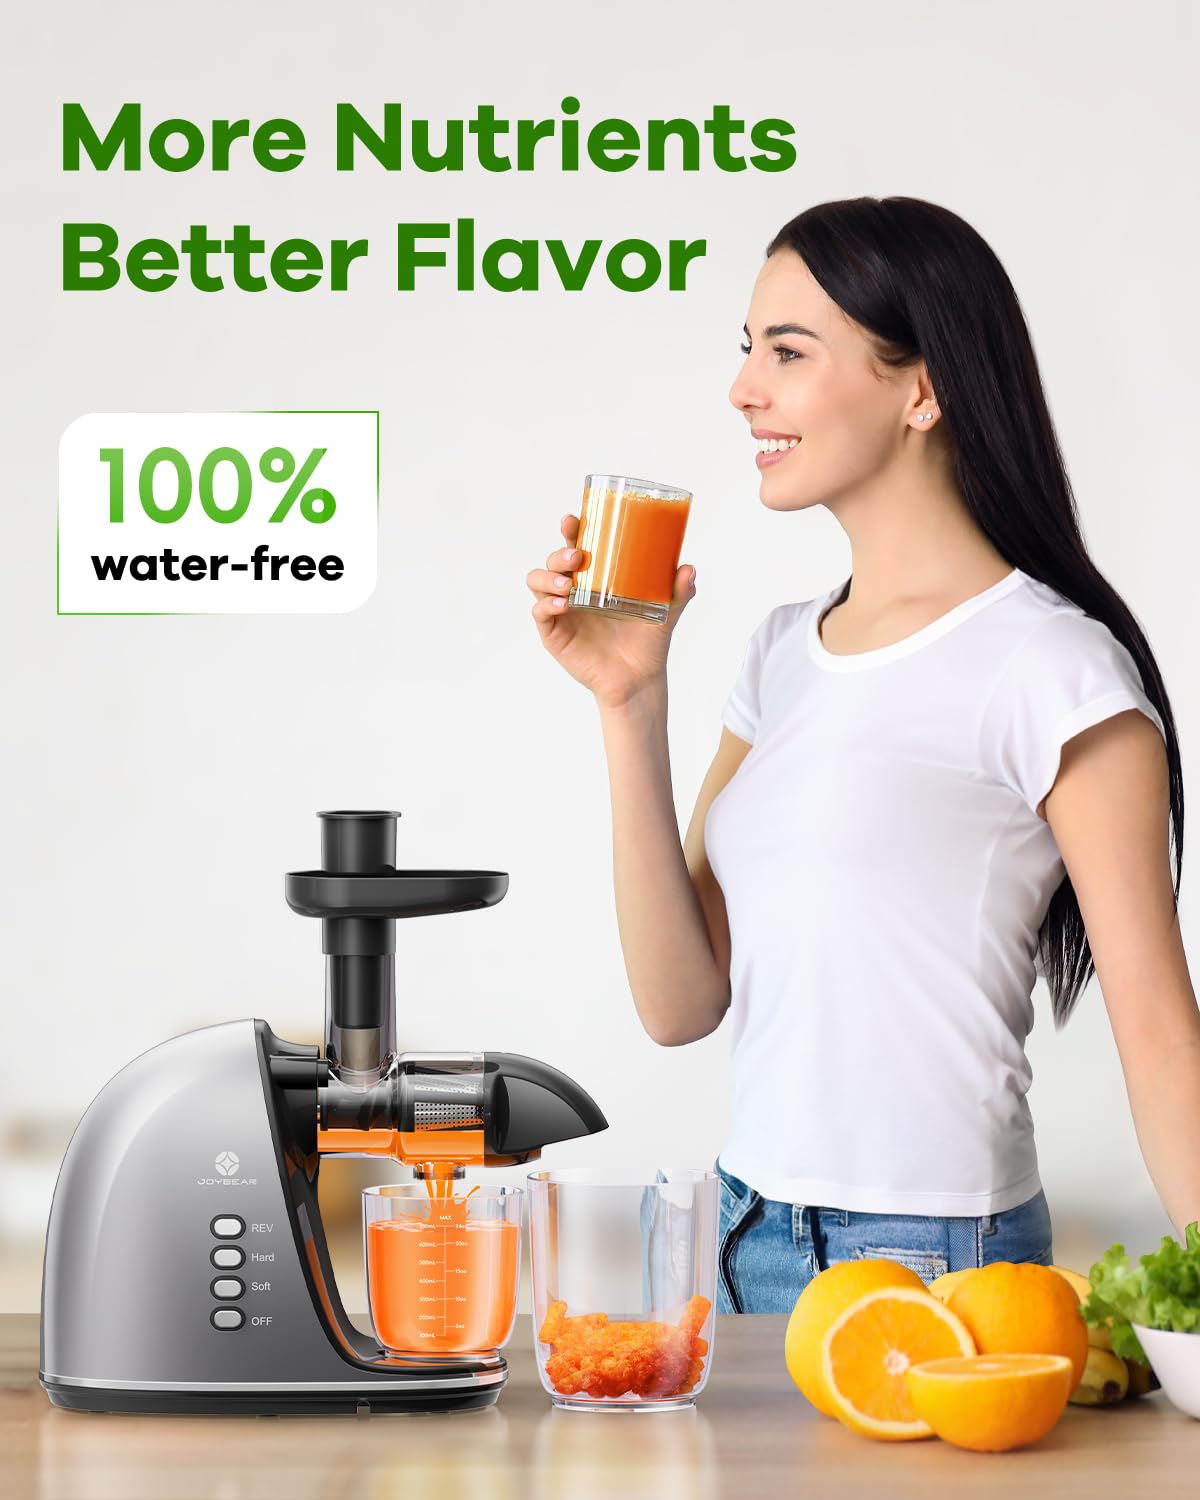 JoyBear Cold Press Juicer Machine: Easy to Clean Slow Masticating Juicer Extractor for Veggies and Fruits, 92% Juice Yield High Nutrient and Vitamin, Quiet Motor &Reverse Function with Brush & Recipes